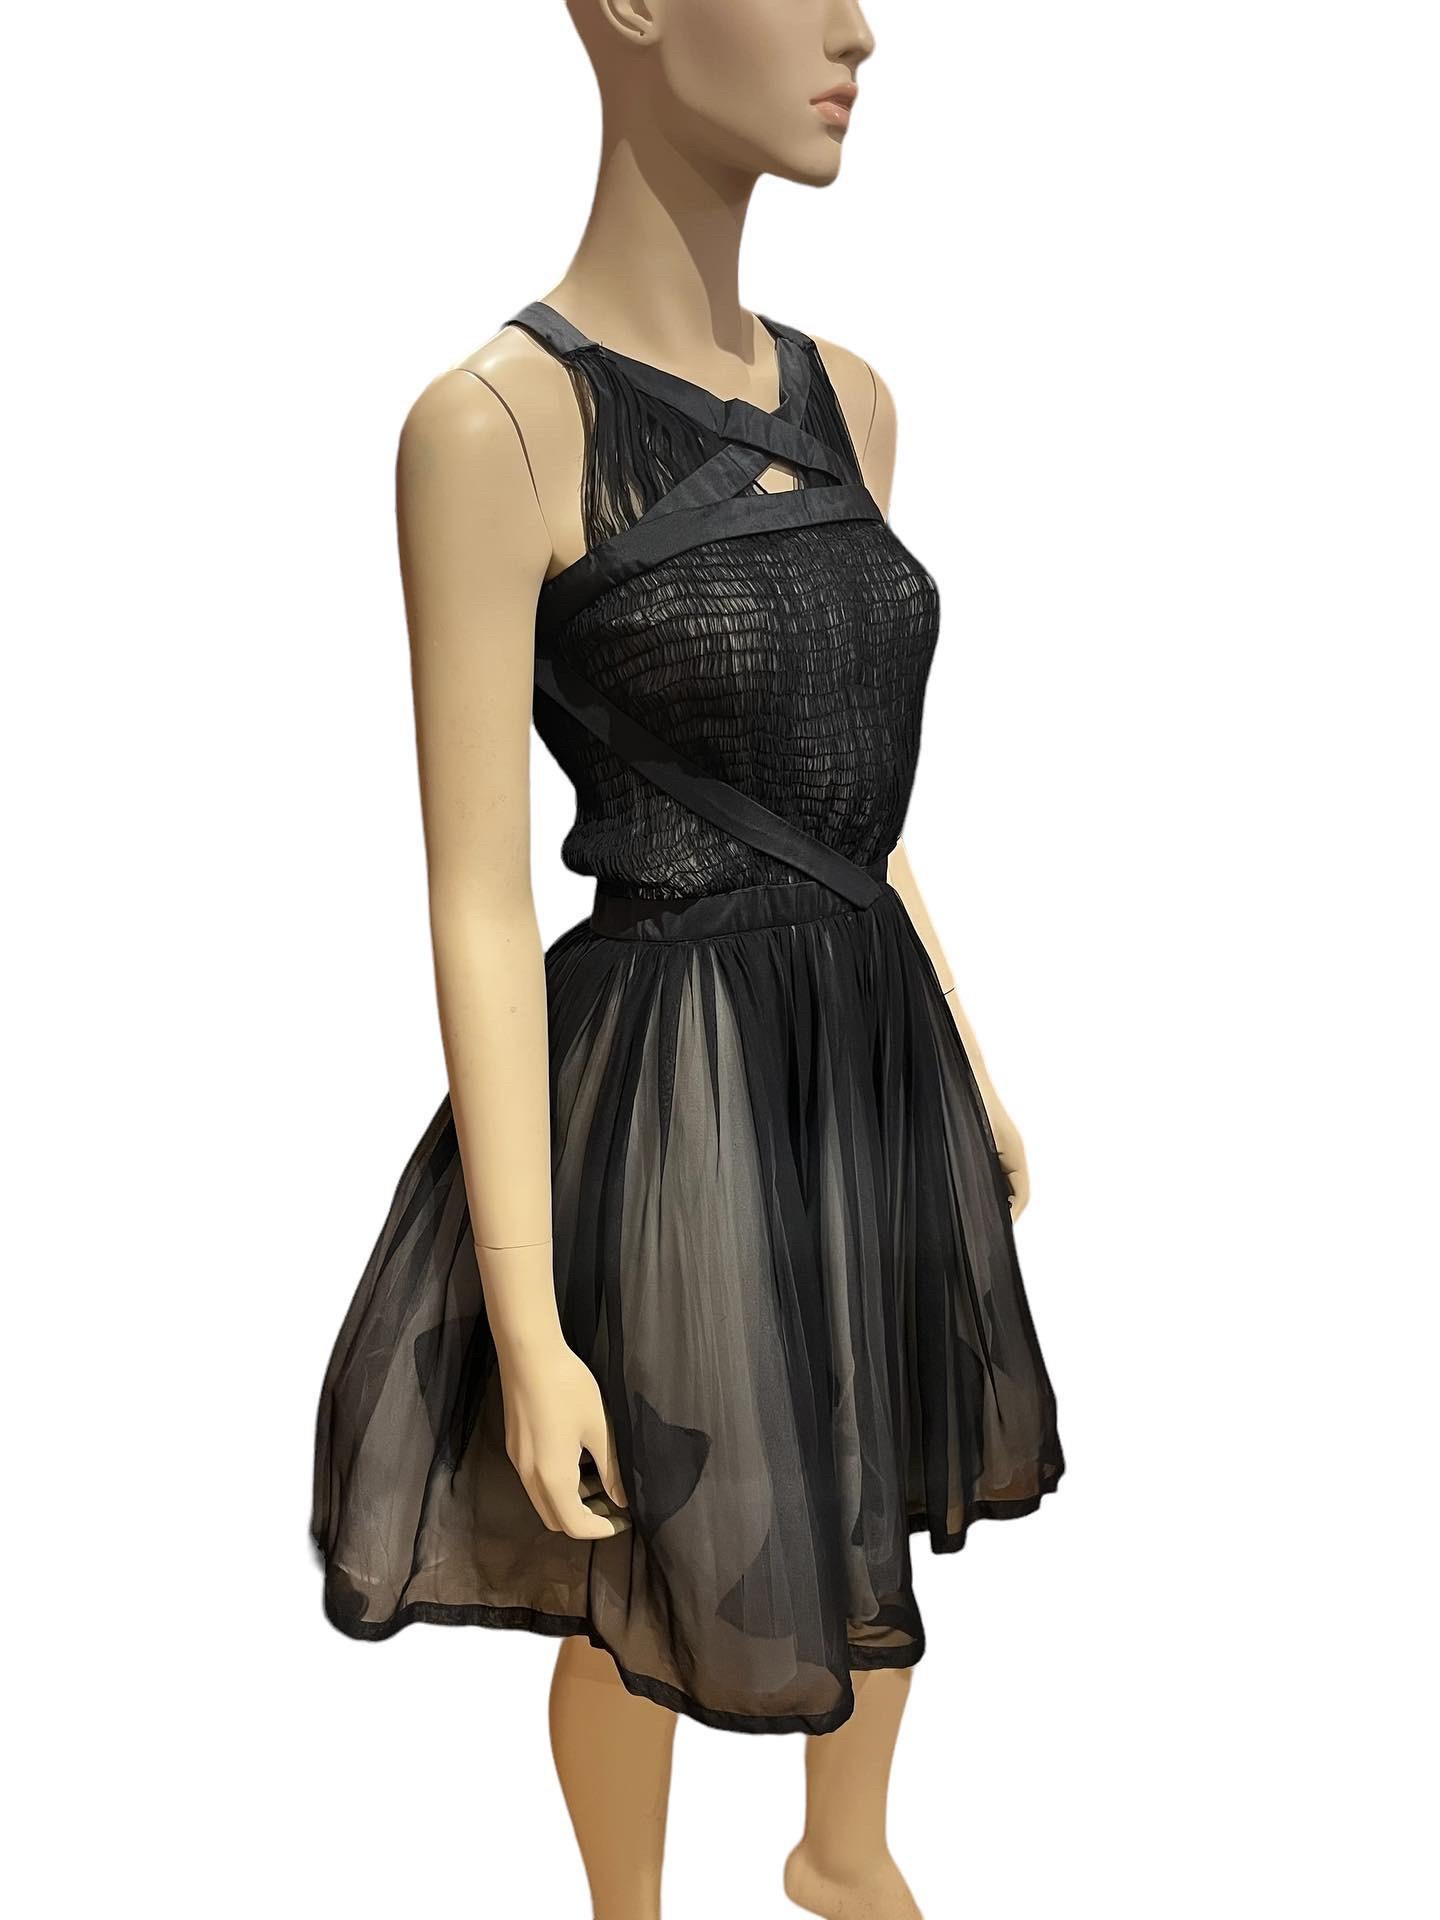 Vintage 80s/90s Stephen Burrows Black Silk Chiffon & Taffeta Layered Dress 

Worn on the runway in the late 80s/90s - See photos for incredible detail!

Labeled size 6 
Bust: 32”
Waist: 24”
Length: 40”

Stephen Burrows is an American fashion